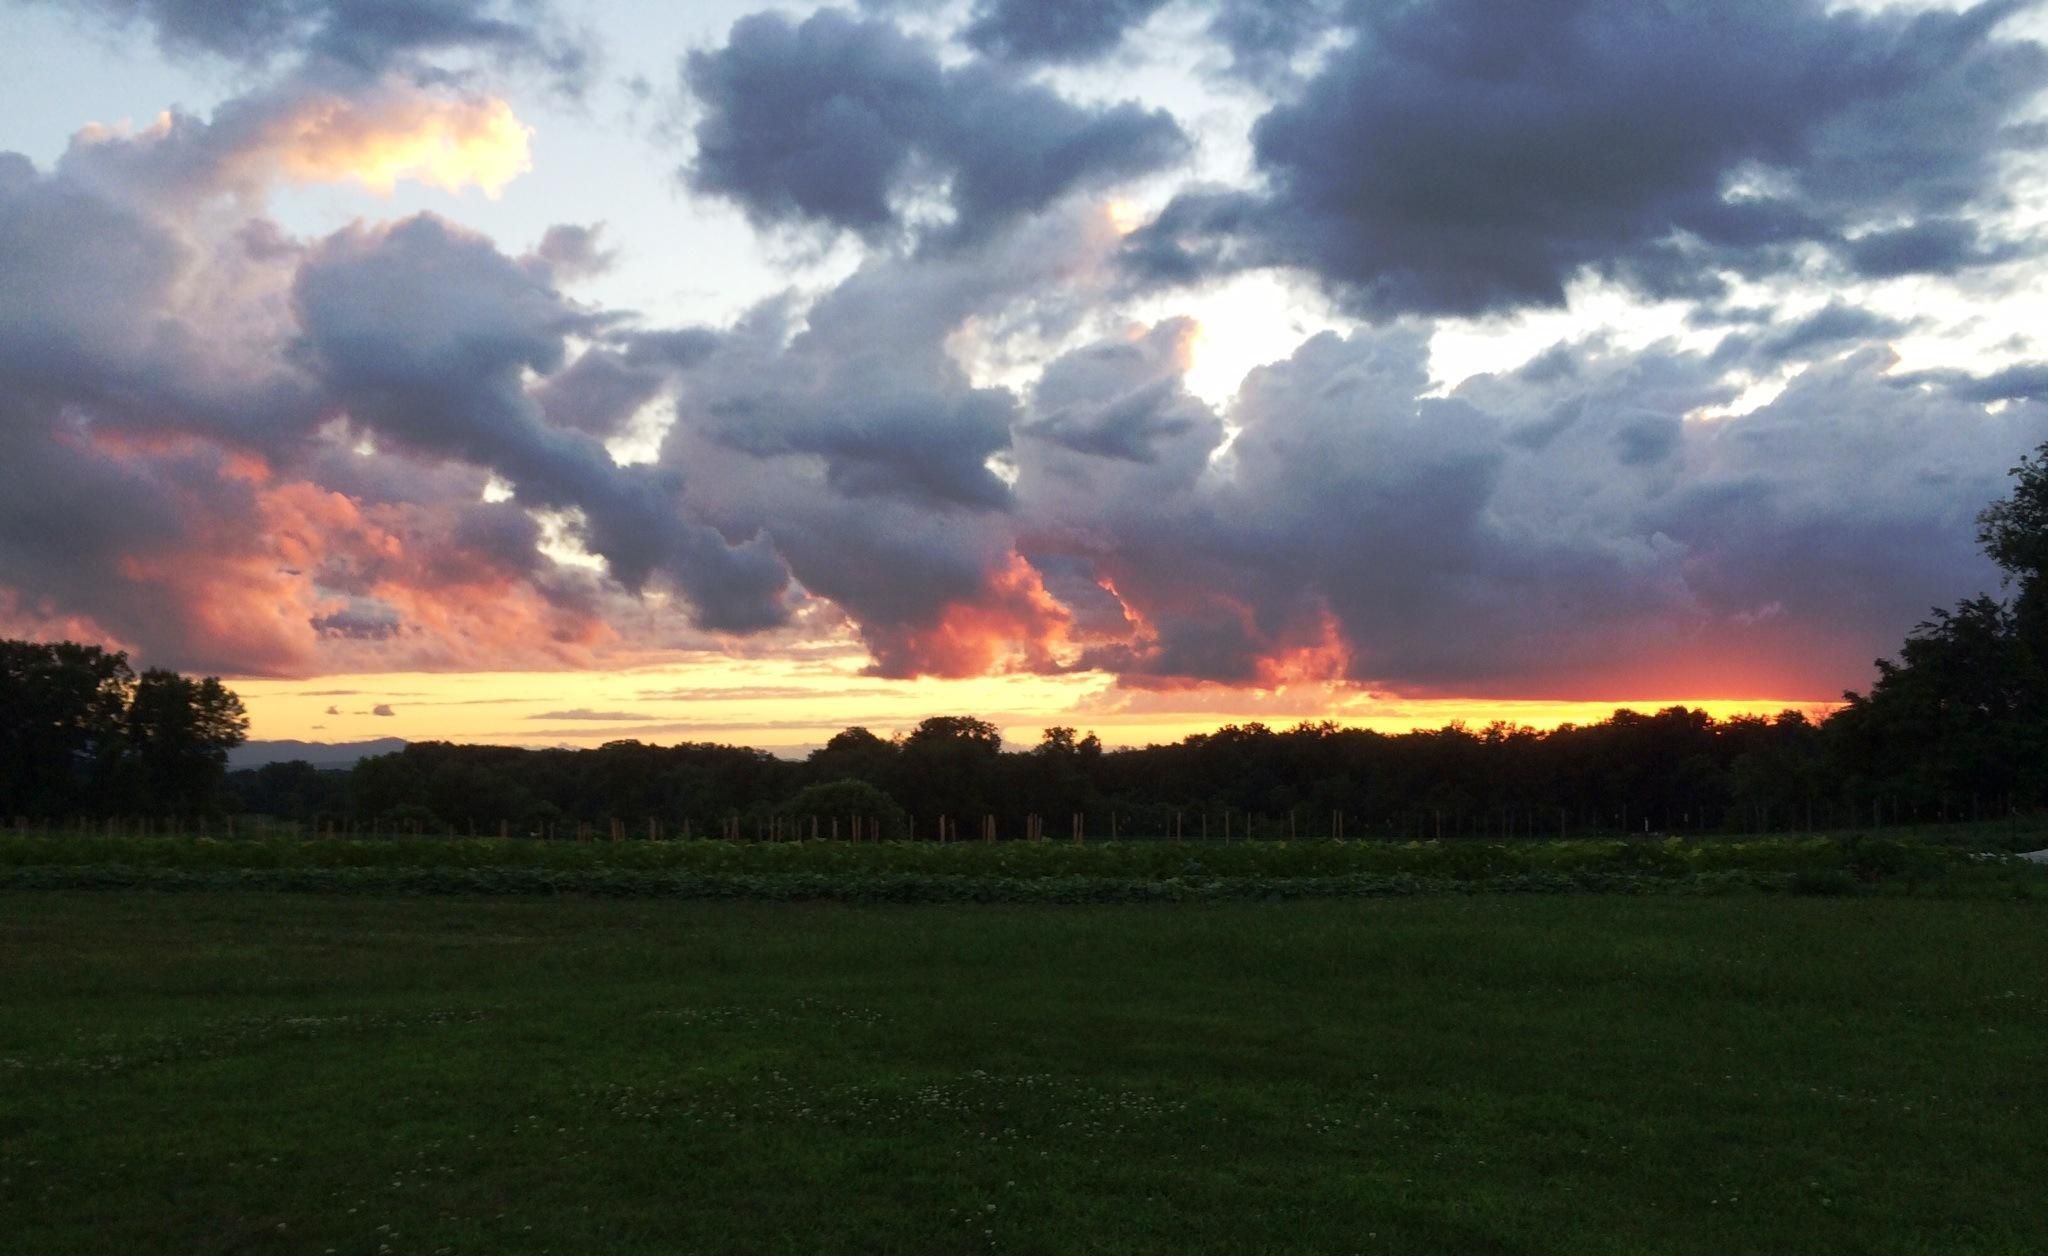 A stunning sunset over the the fields of Lindenwald with the Catskill Mountains rising in the distance.